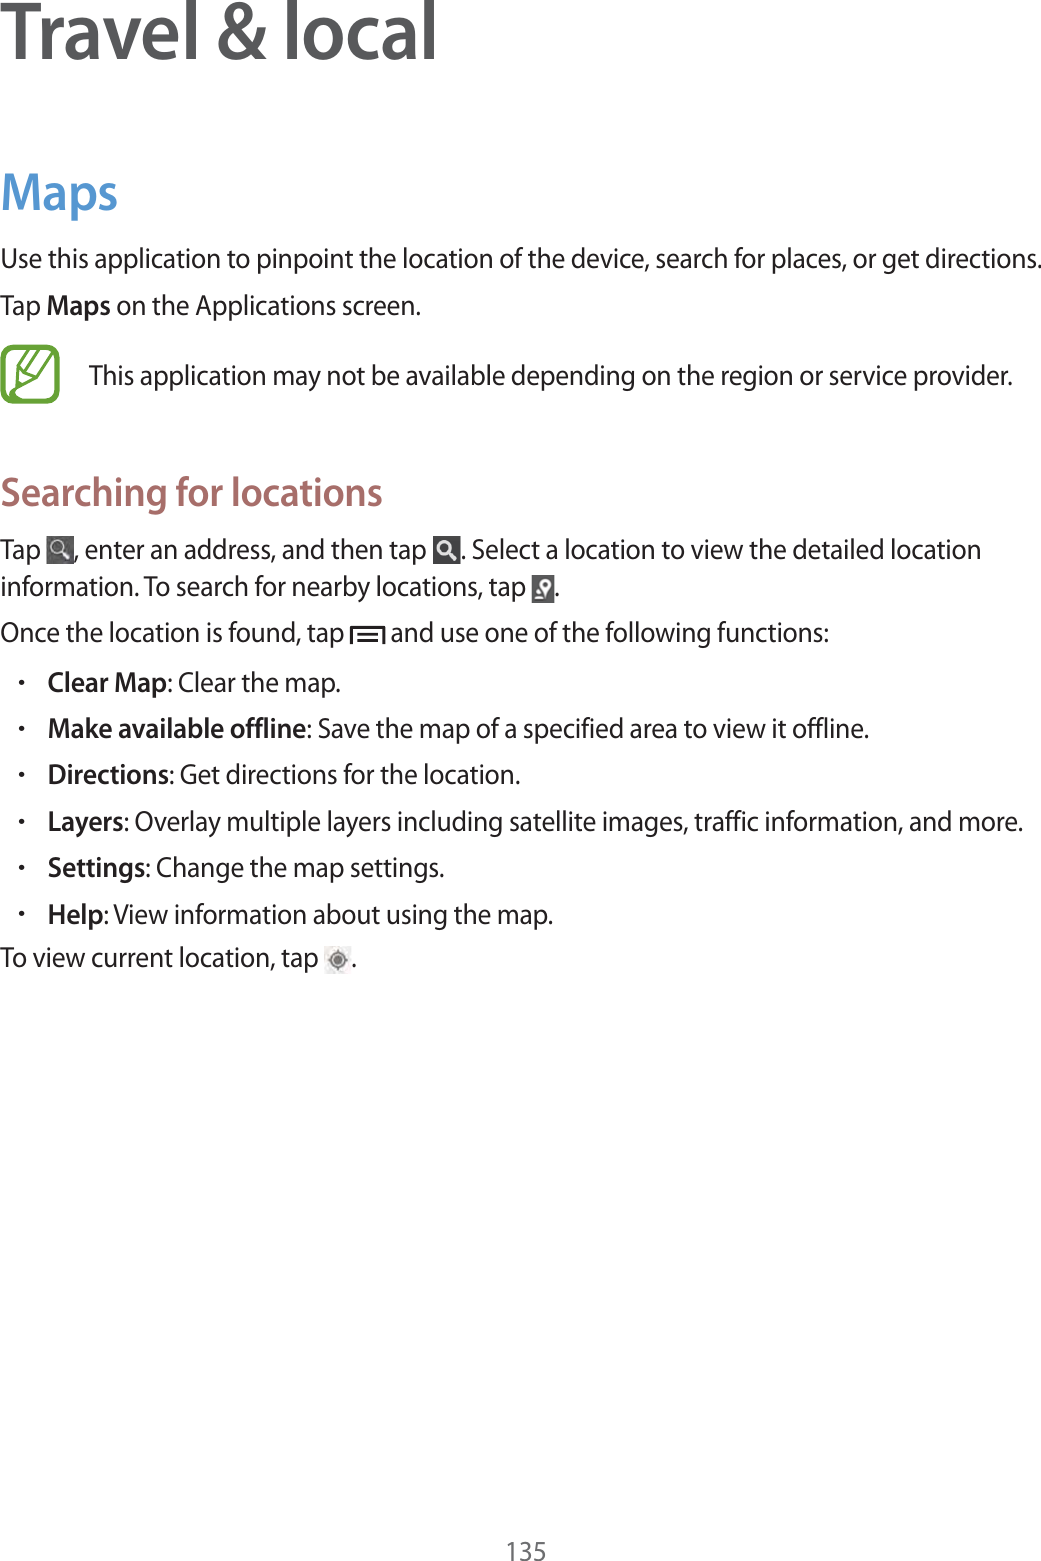 135Travel &amp; localMapsUse this application to pinpoint the location of the device, search for places, or get directions.Tap Maps on the Applications screen.This application may not be available depending on the region or service provider.Searching for locationsTap  , enter an address, and then tap  . Select a location to view the detailed location information. To search for nearby locations, tap  .Once the location is found, tap   and use one of the following functions:rClear Map: Clear the map.rMake available offline: Save the map of a specified area to view it offline.rDirections: Get directions for the location.rLayers: Overlay multiple layers including satellite images, traffic information, and more.rSettings: Change the map settings.rHelp: View information about using the map.To view current location, tap  .